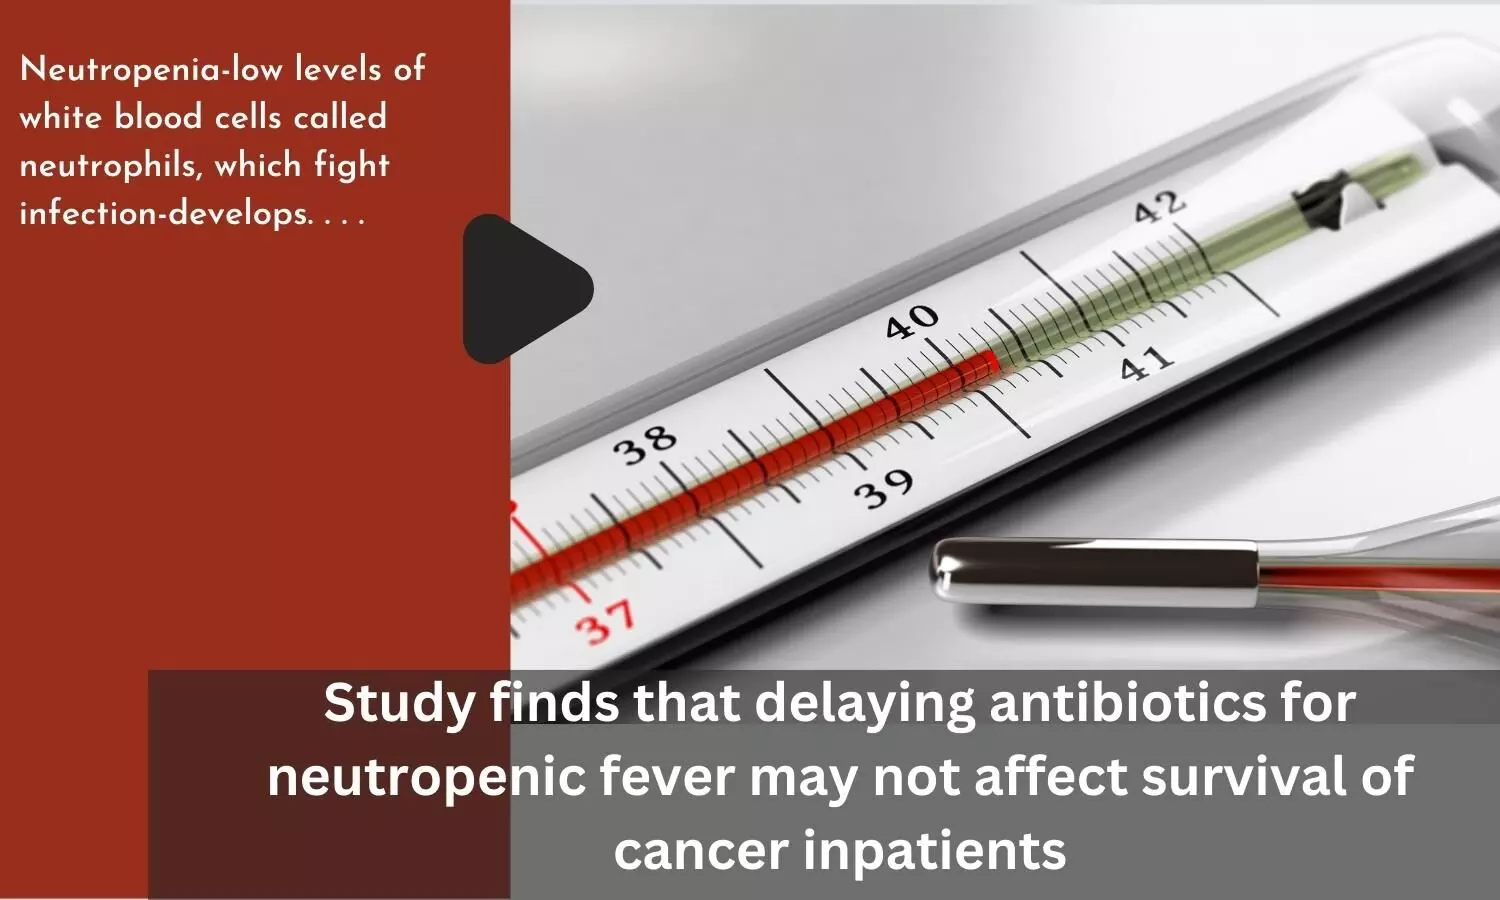 Study finds that delaying antibiotics for neutropenic fever may not affect survival of cancer inpatients